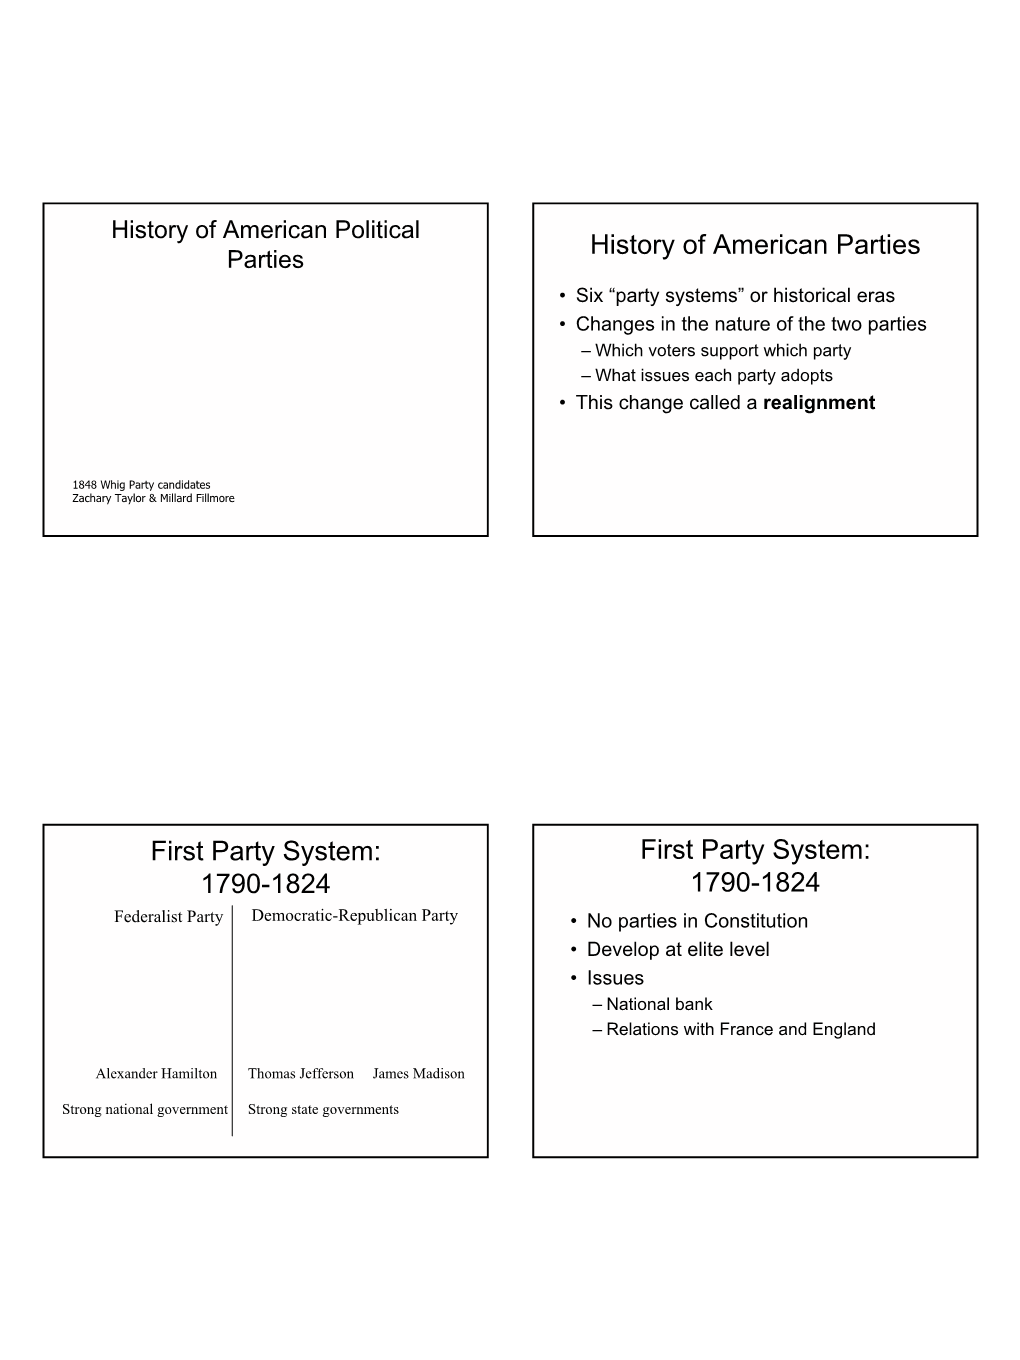 1790-1824 First Party System